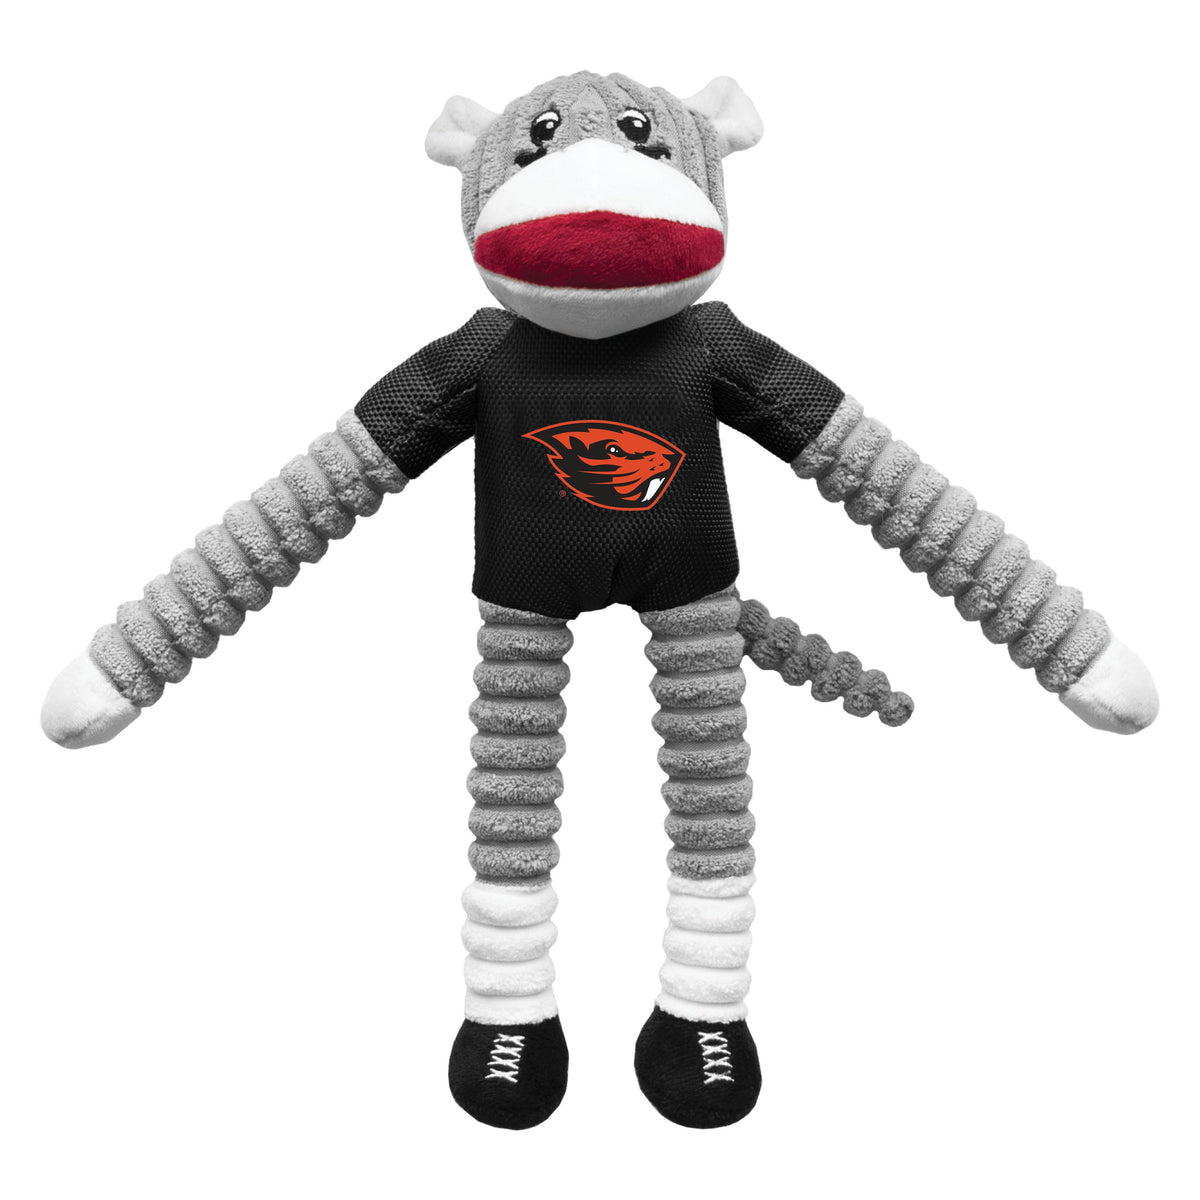 OR State Beavers Sock Monkey Toy - 3 Red Rovers